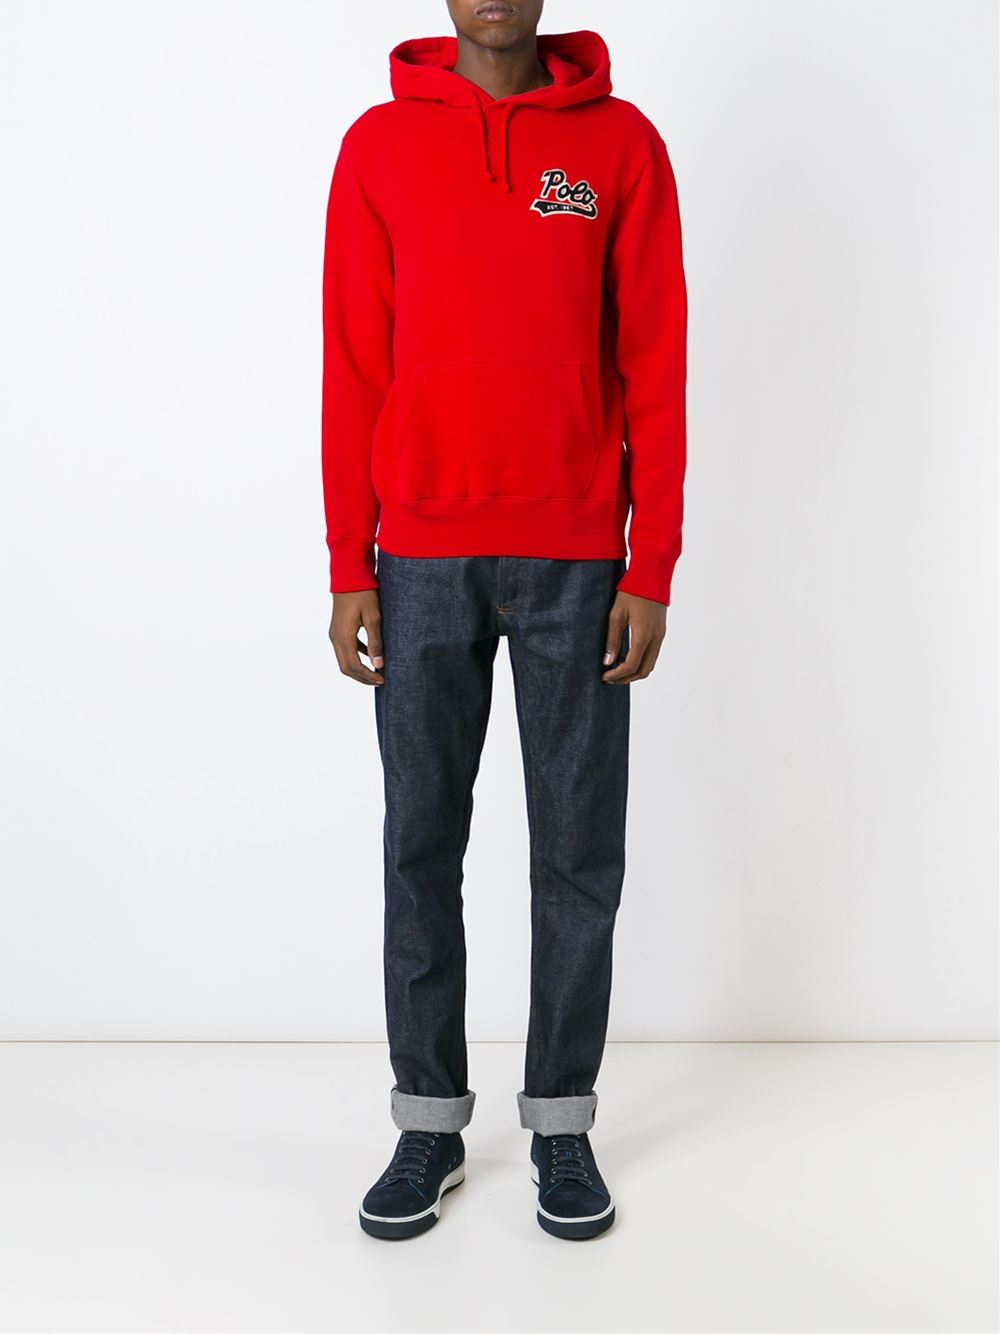 Polo Ralph Lauren Cotton Logo Patch Hoodie in Red for Men - Lyst